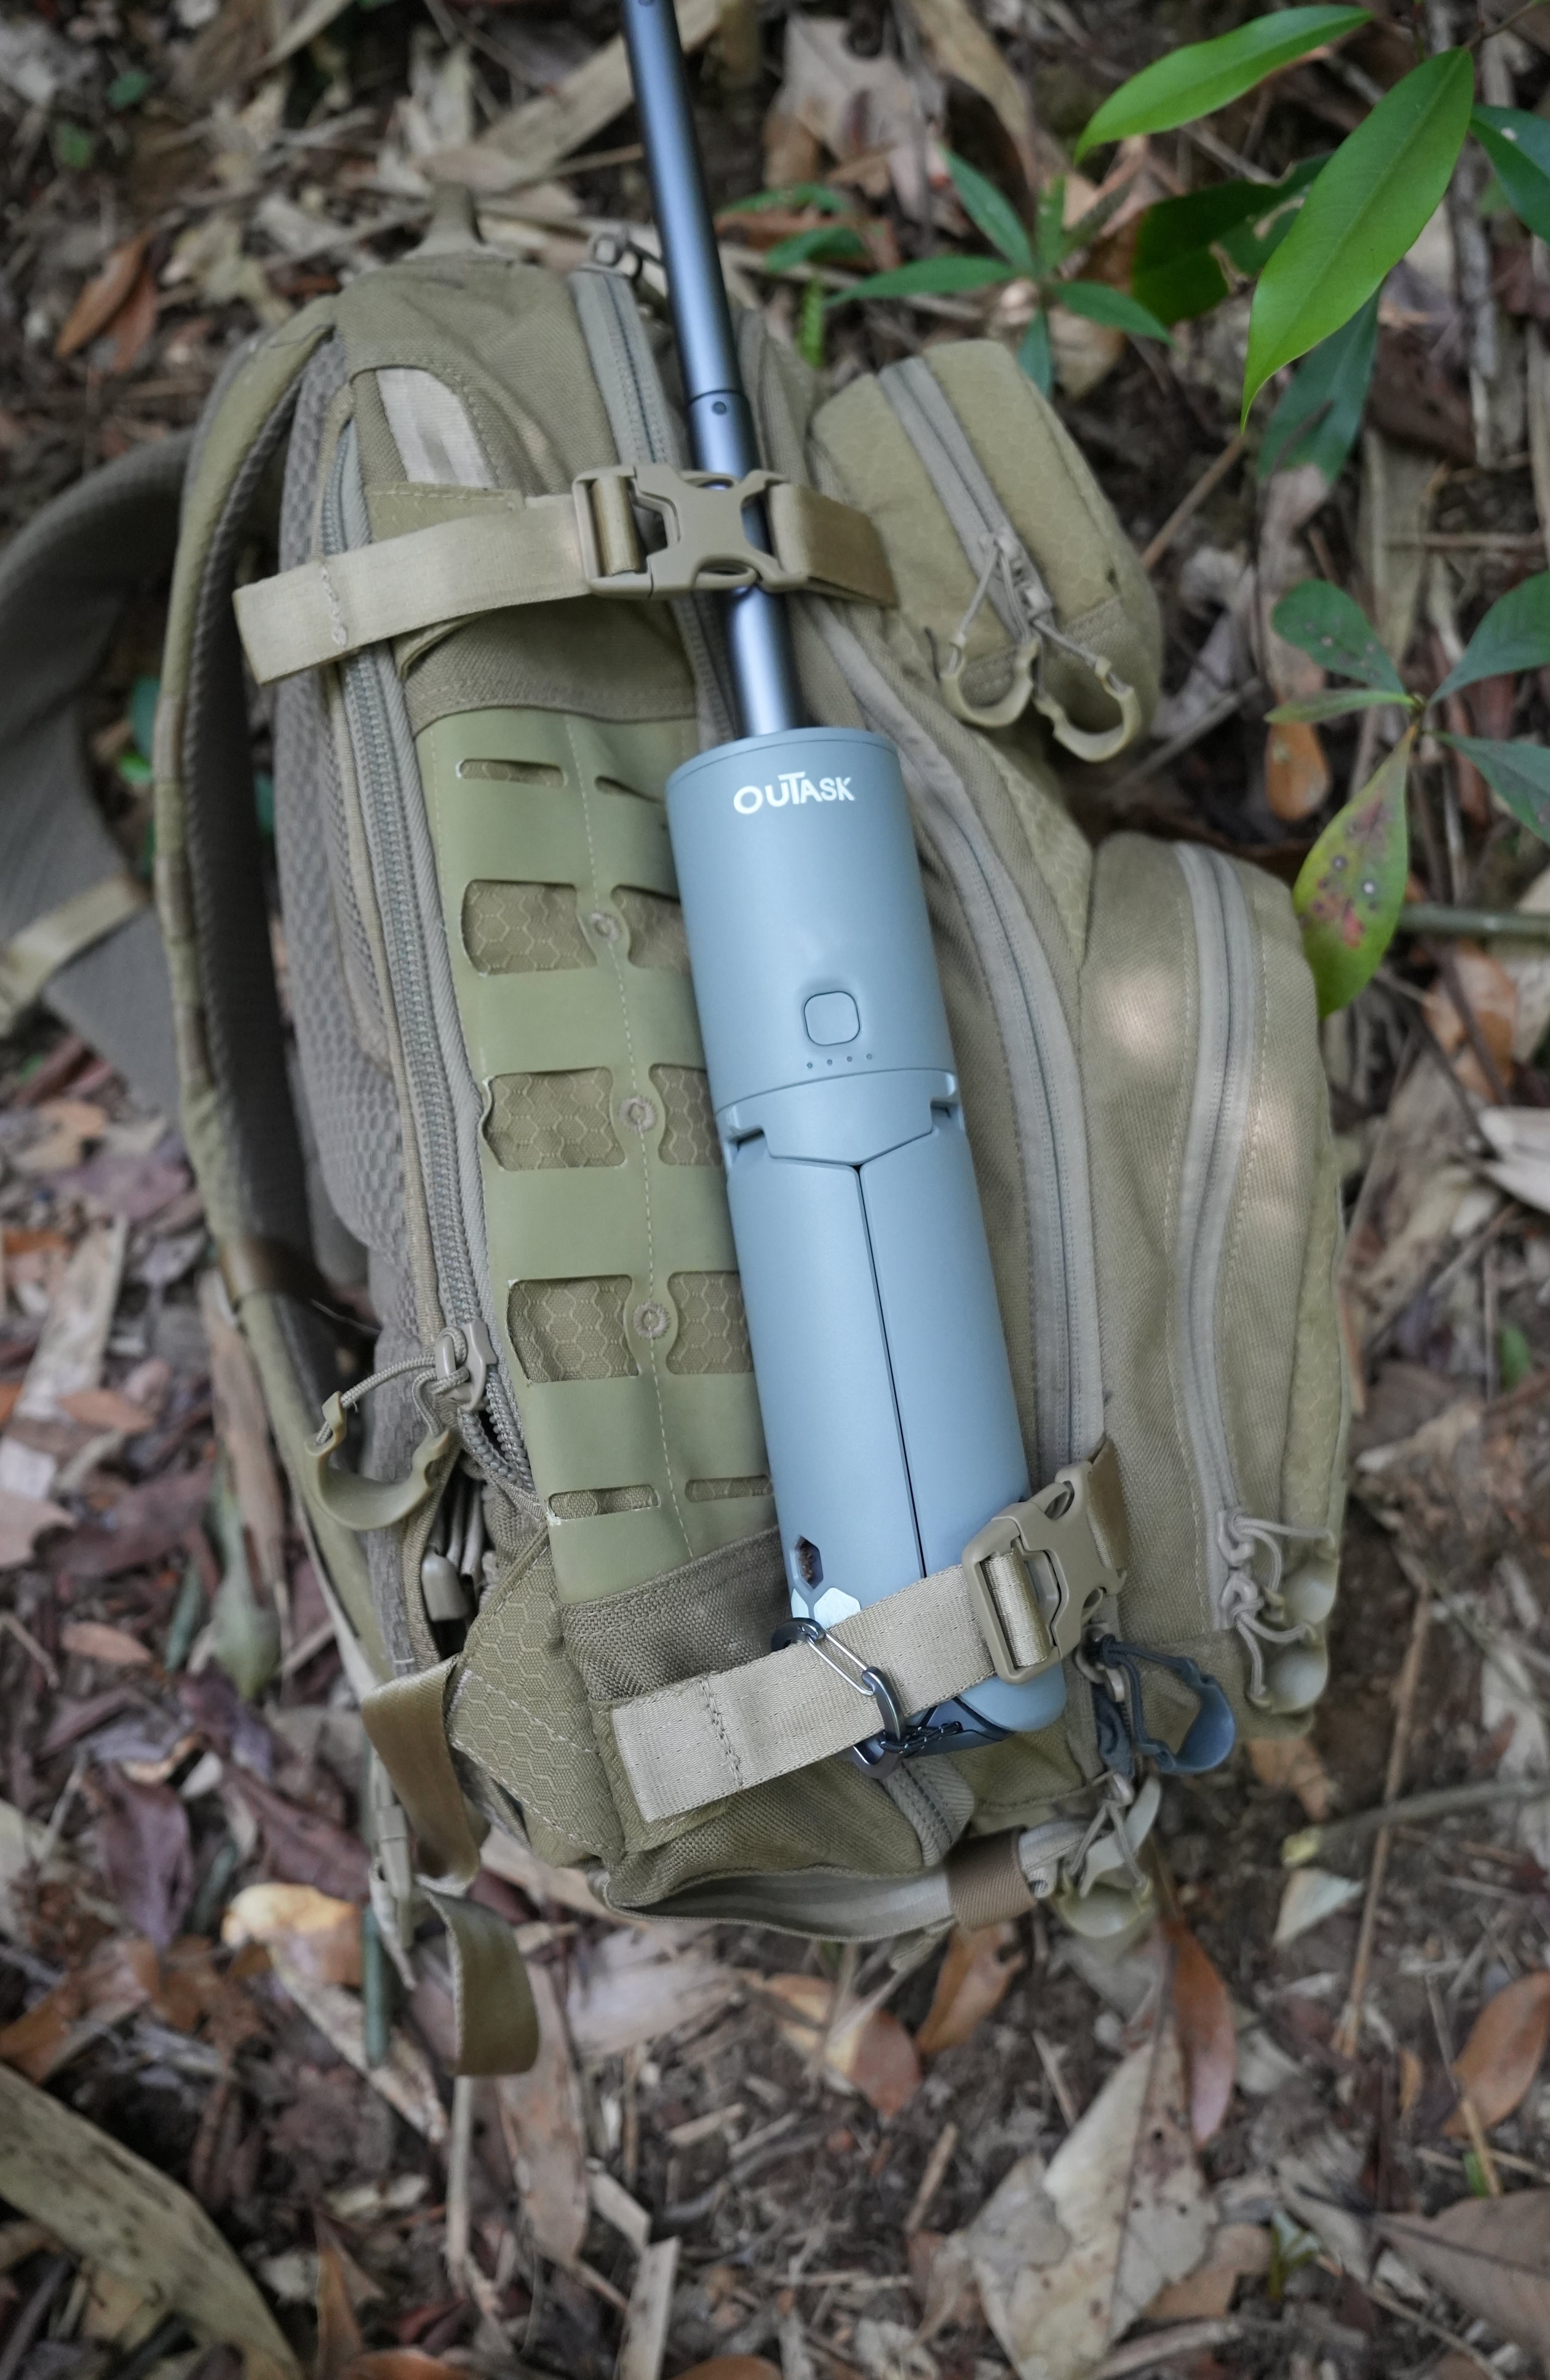 OuTask TD-1 Multifunction Light - Military Green